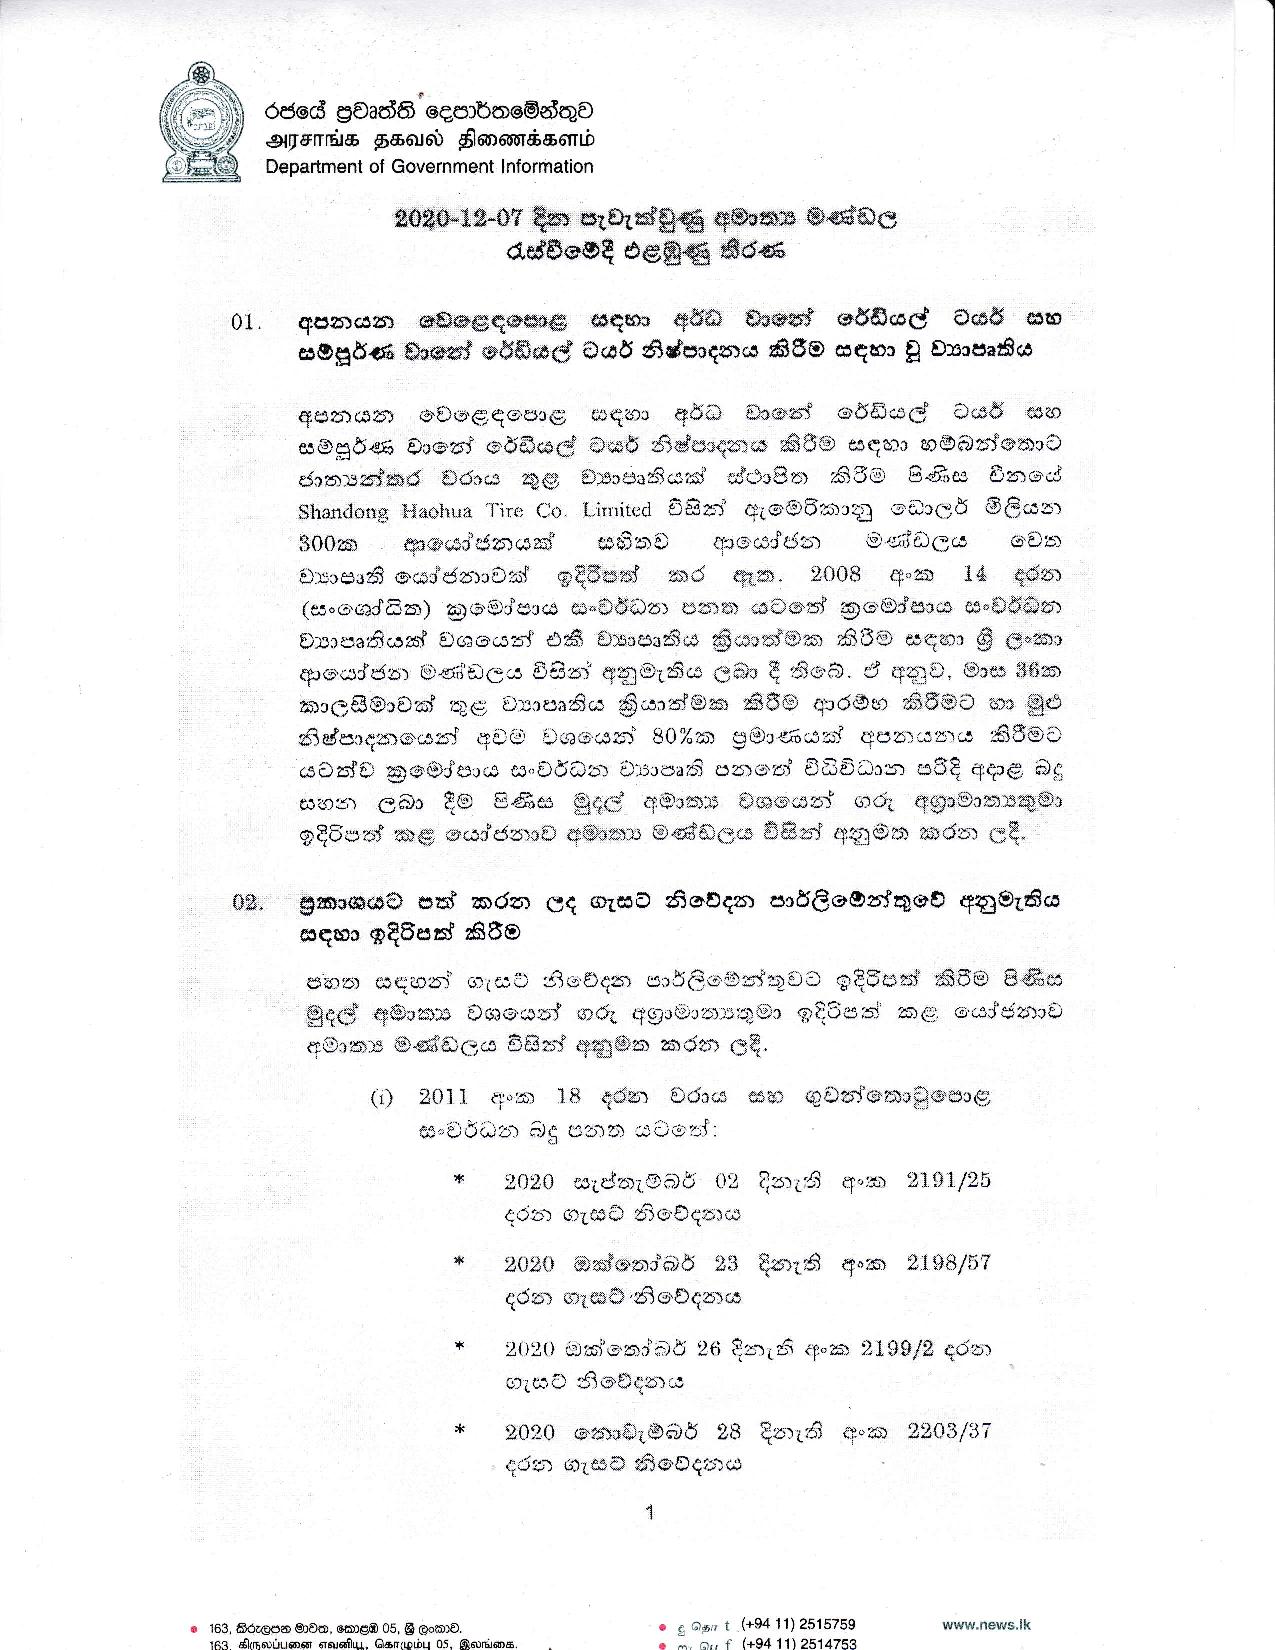 Cabinet Decision on 07.12.2020 page 001